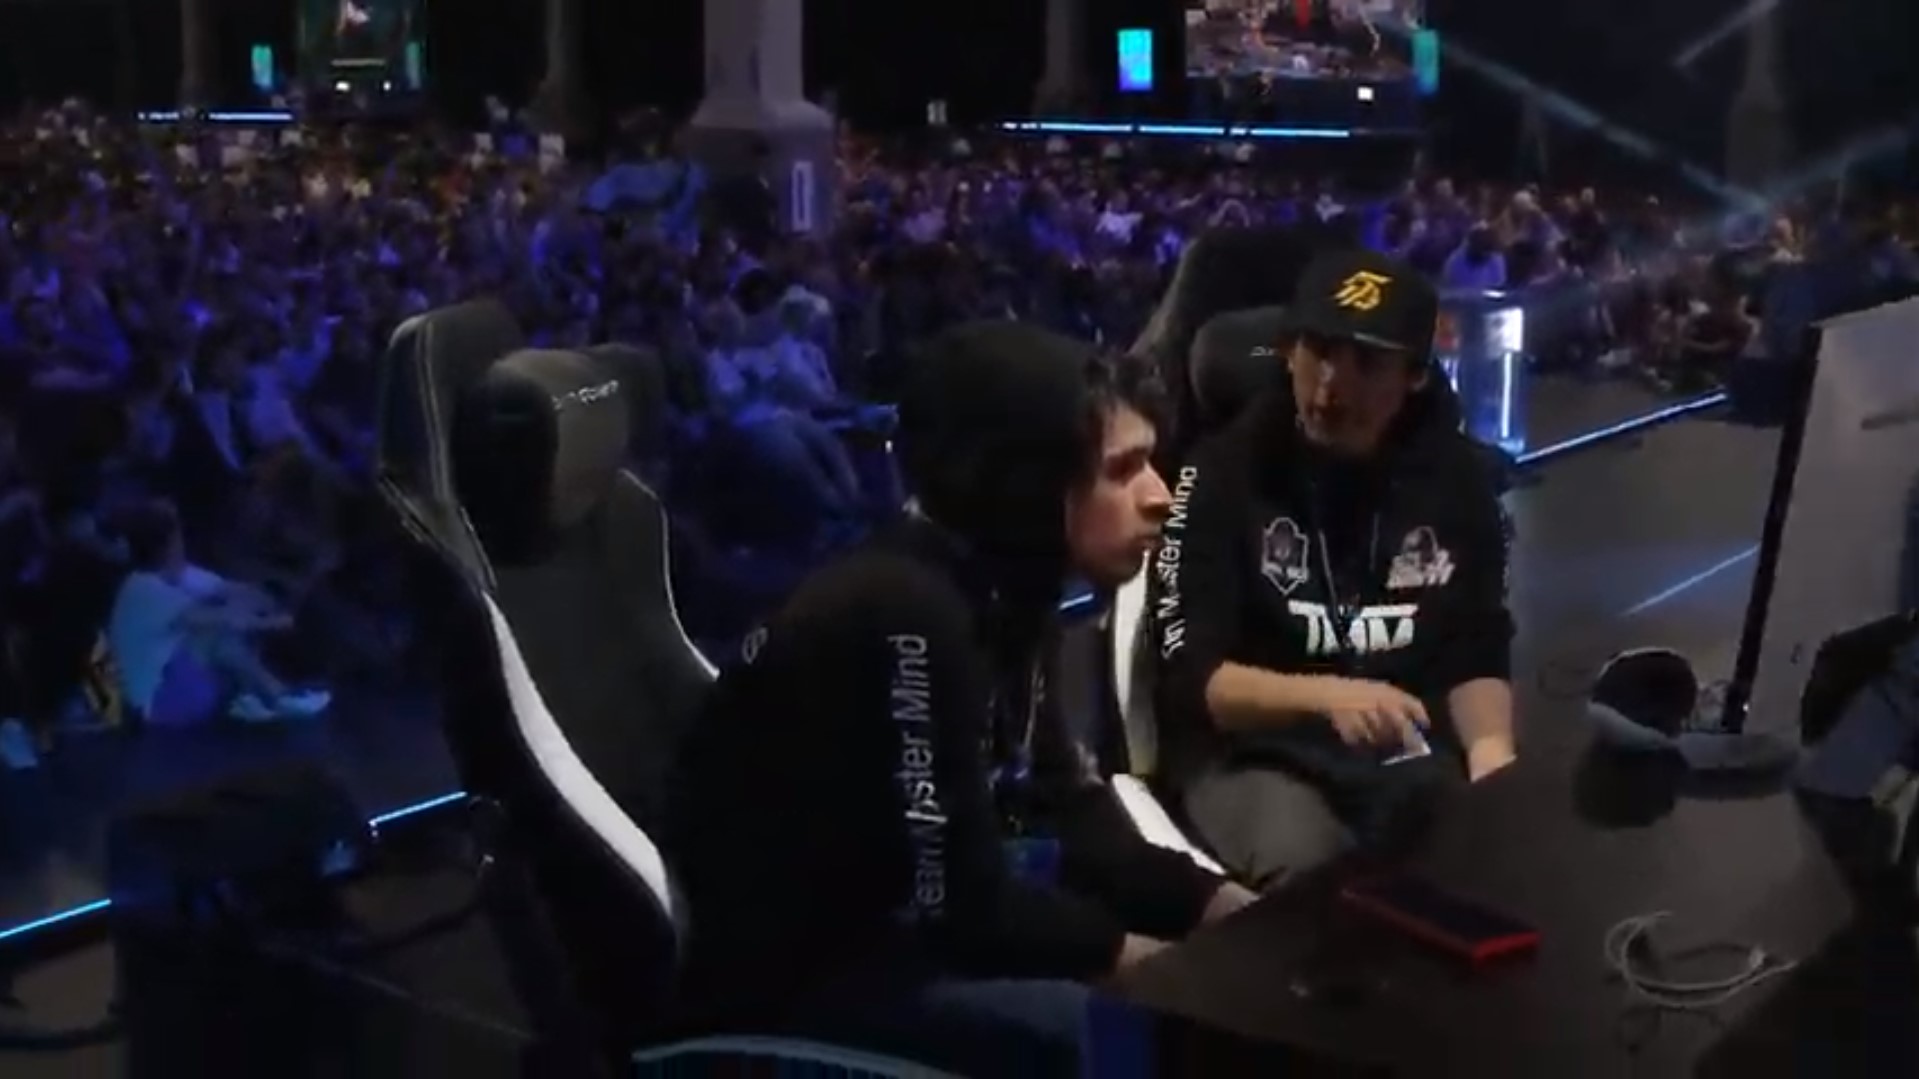 The moment the twins (Nicholas and Scorpionprocs) met at Evo 2023